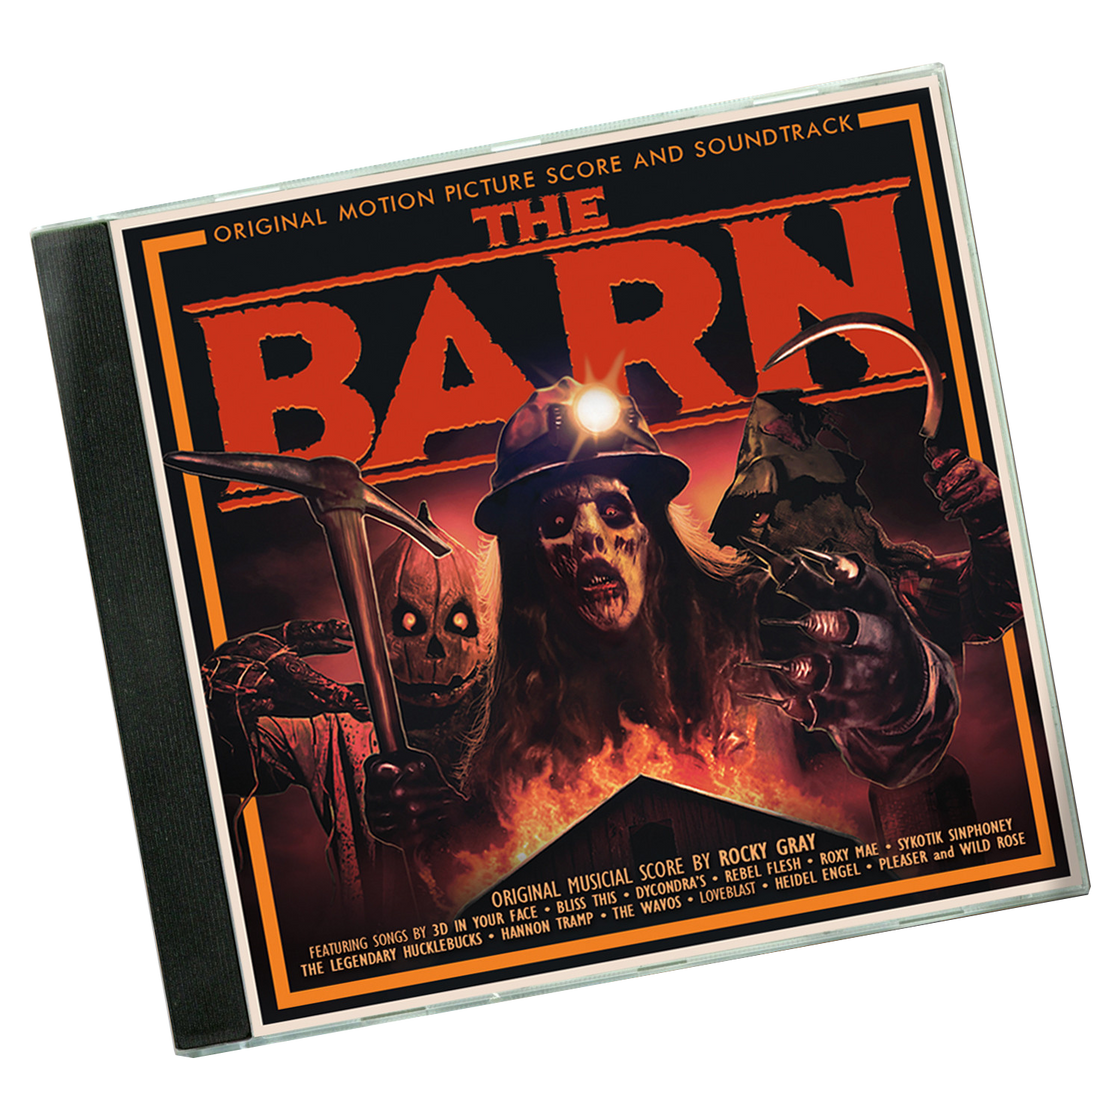 The Barn - Soundtrack - CD (2 Disc) Score and Various Artists